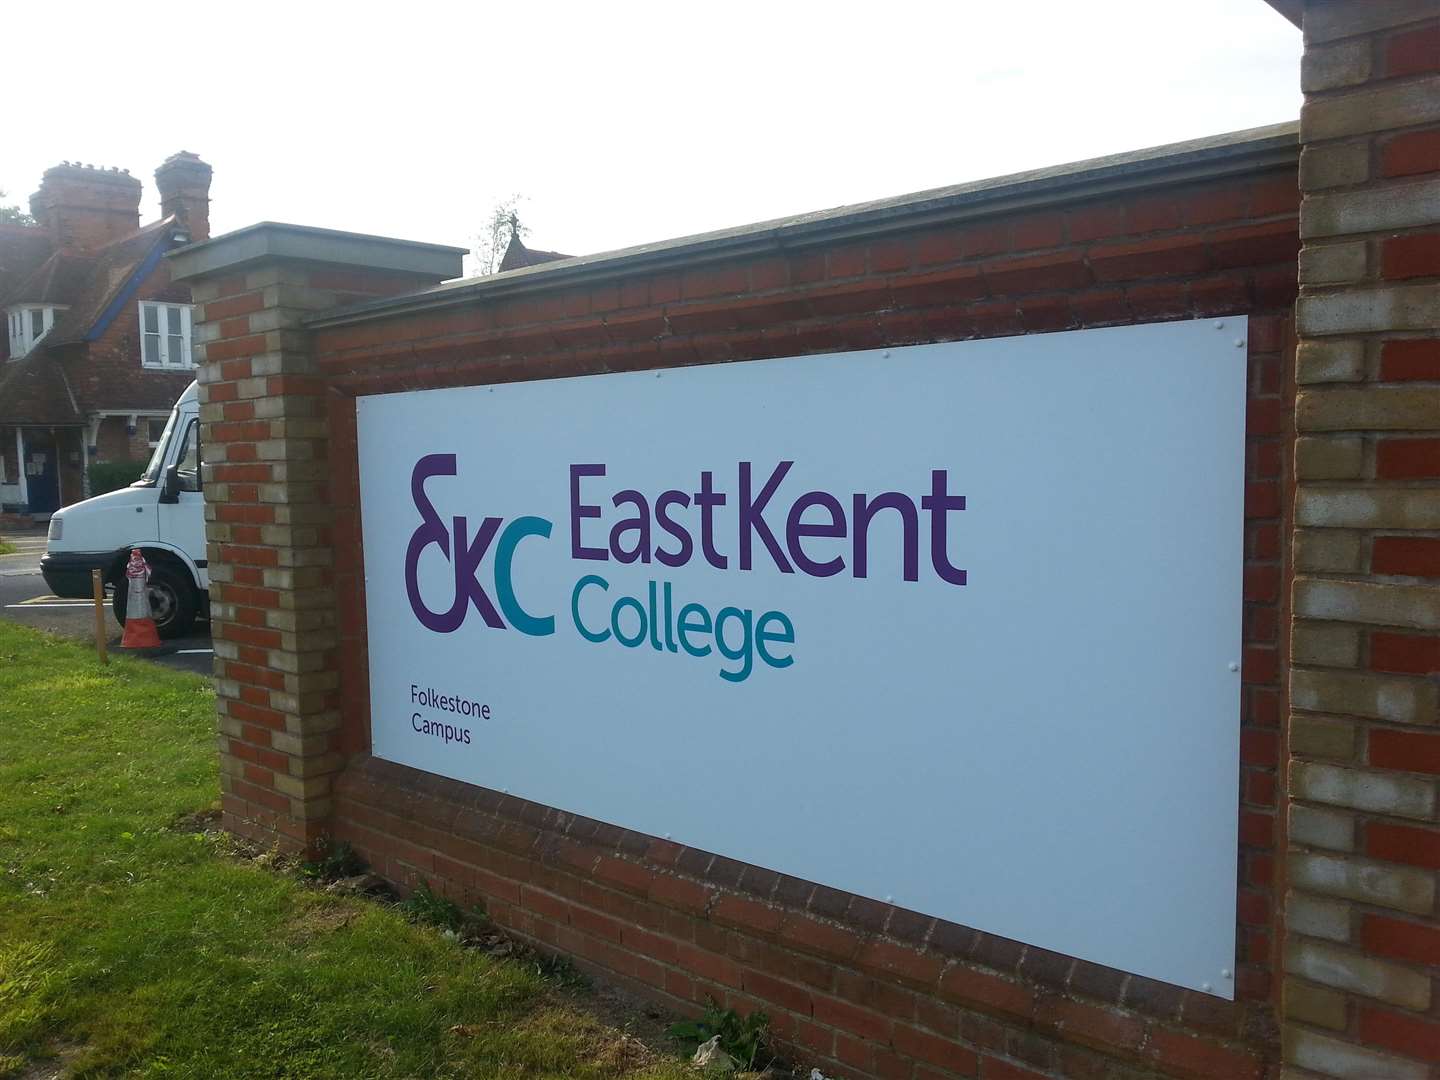 East Kent College in Folkestone has seen investment in its construction facilities